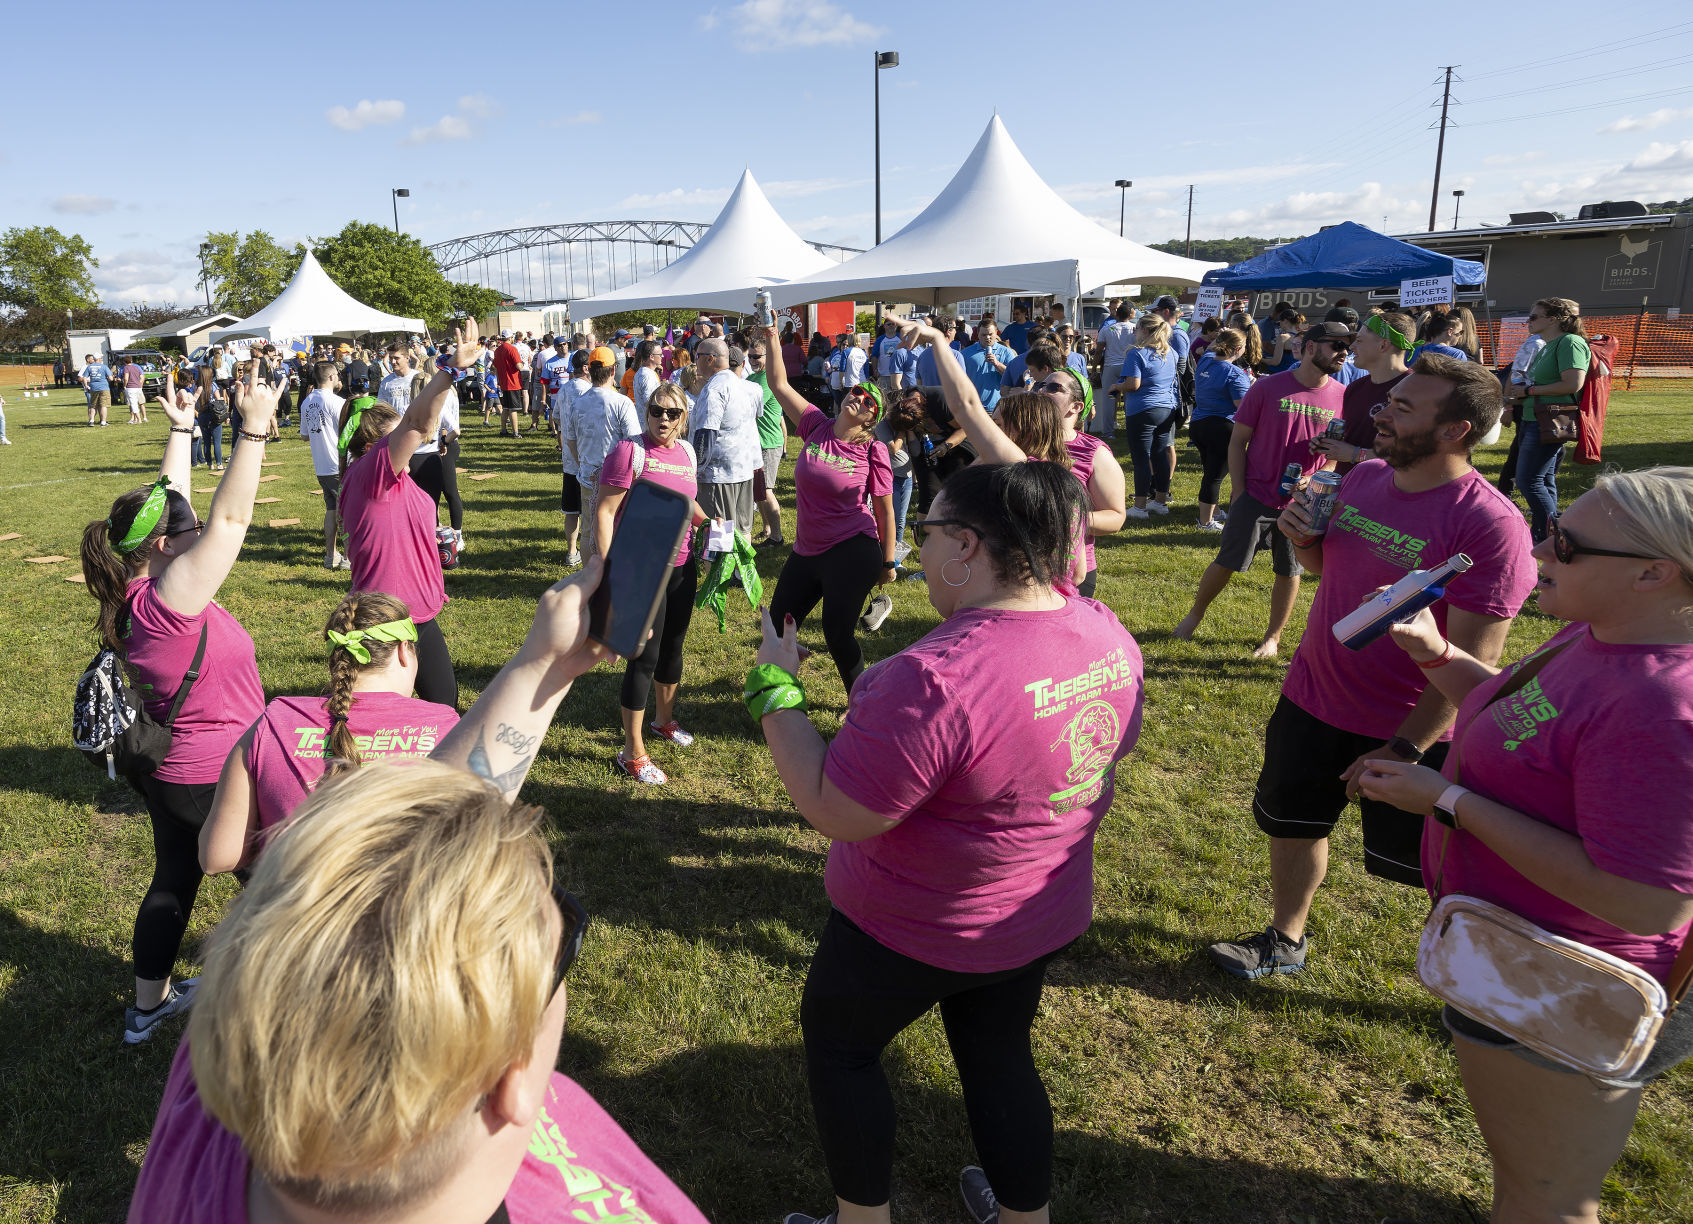 Members of team Theisen’s dance before the games begin at the Area Residential Care Corporate and Community game night at the Port of Dubuque on Friday, June 10.    PHOTO CREDIT: Stephen Gassman